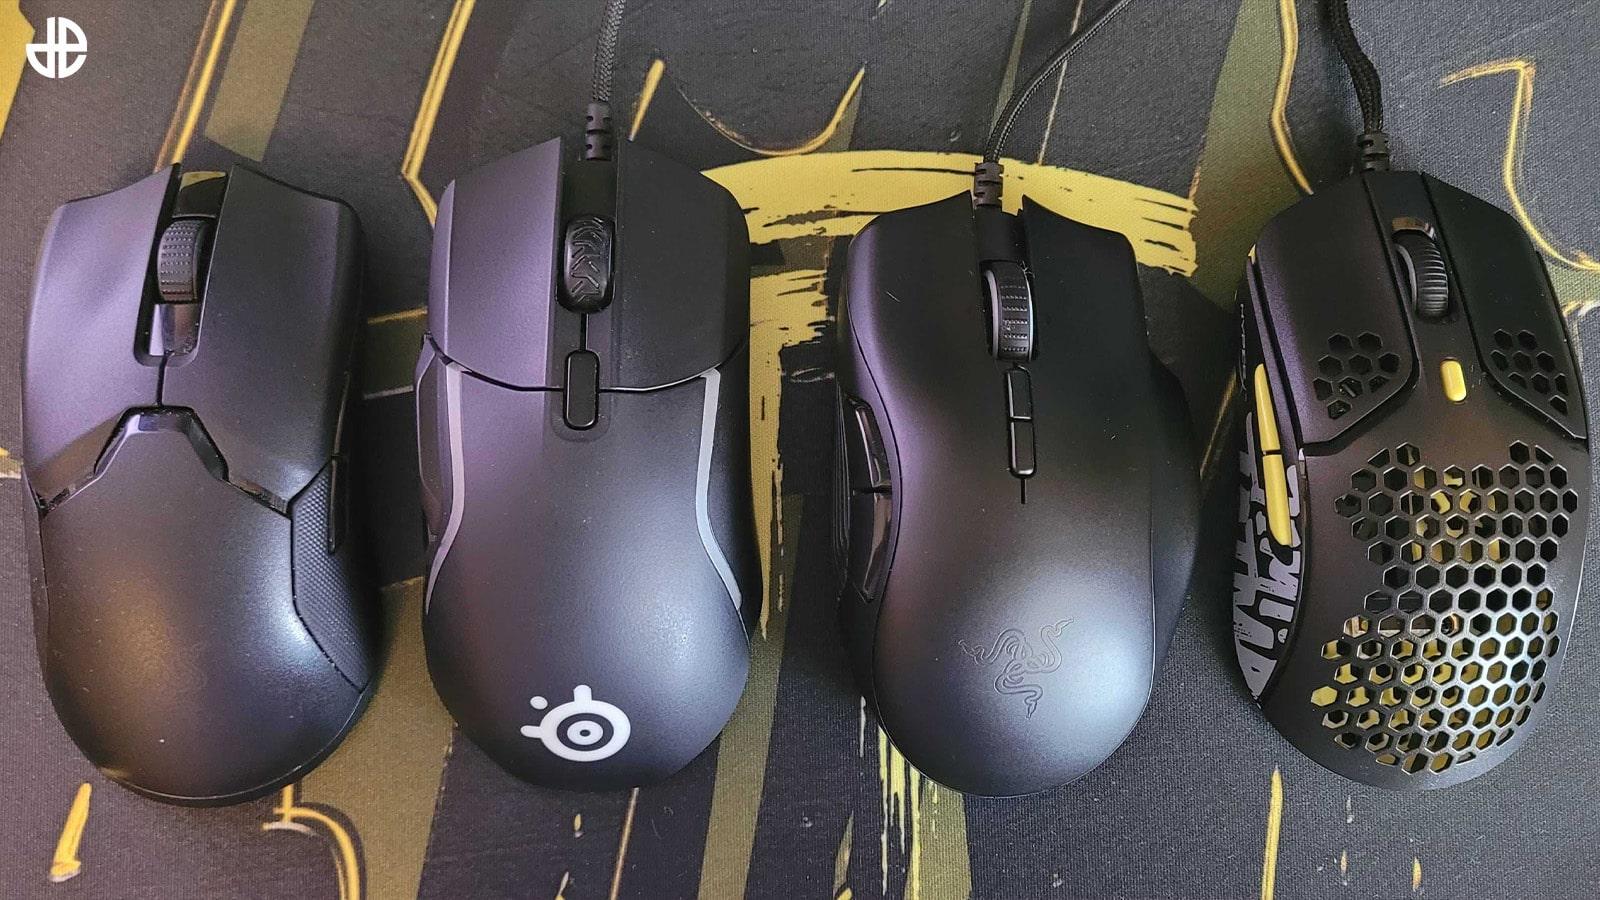 What is a gaming mouse? How does it differ from a regular mouse